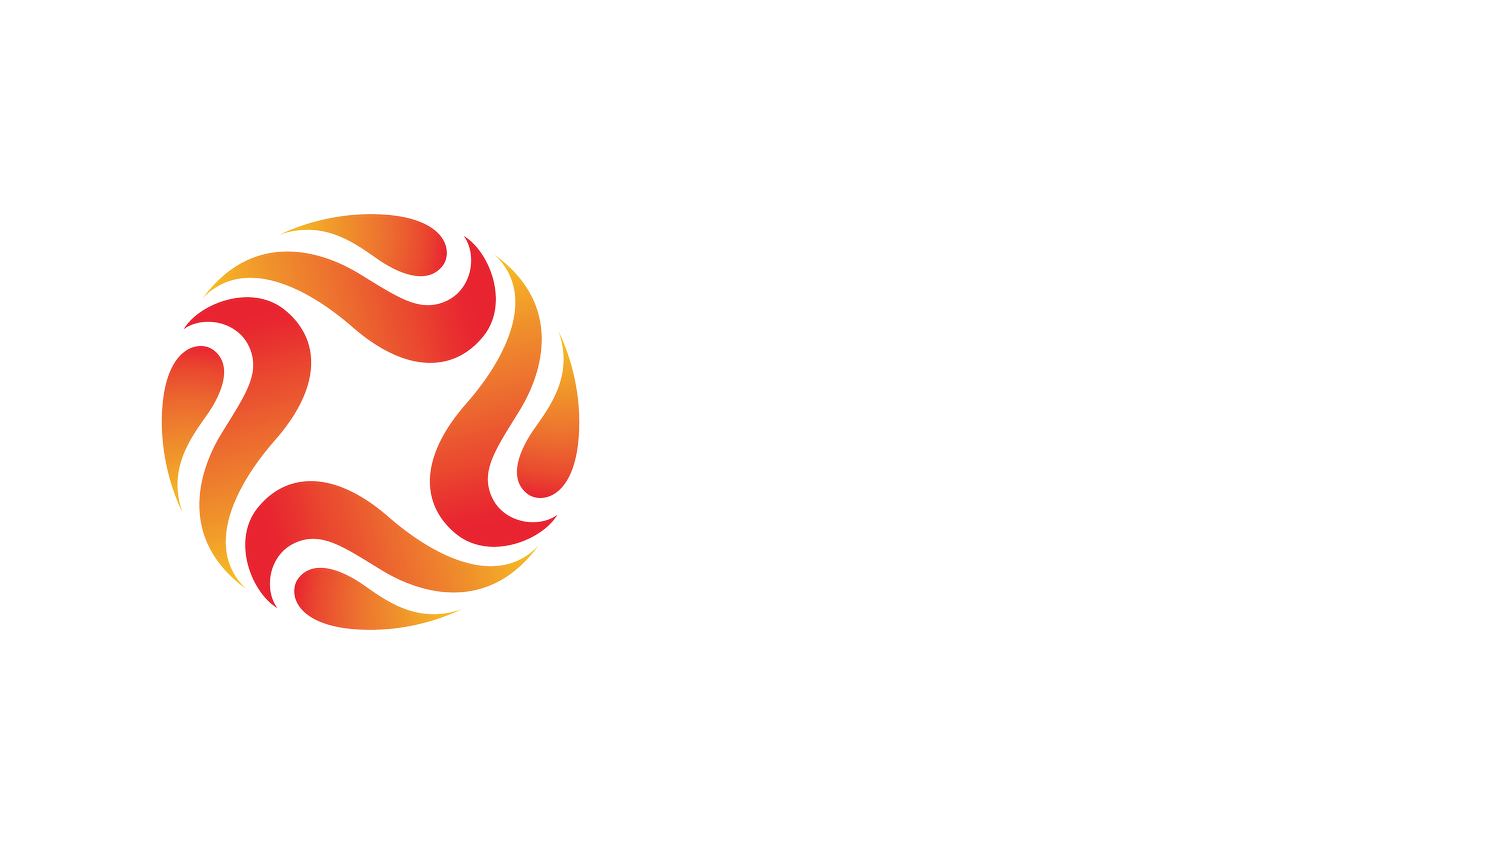 THE FOUR-FIRES TRIBE